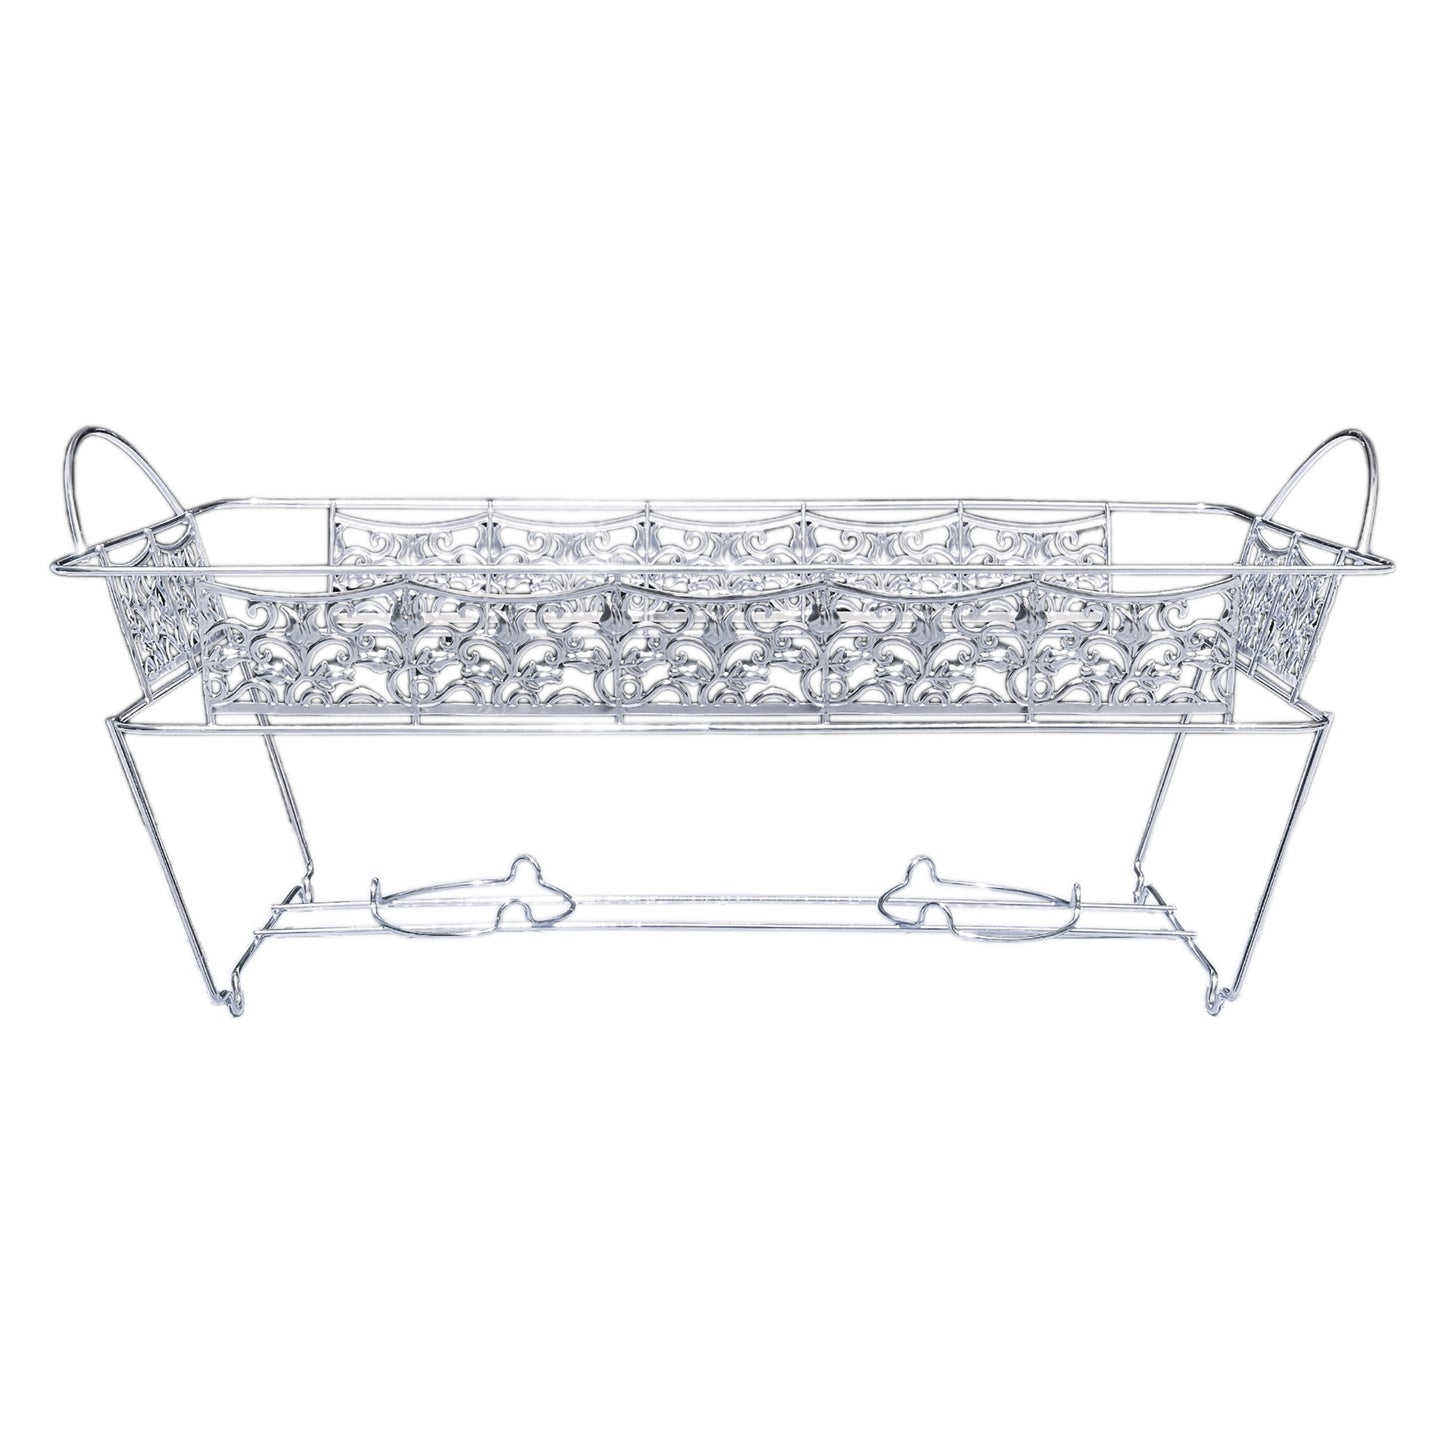 Hanna K. Signature Elements Decorative Disposable Silver Full size Chafing Rack Disposable Hanna K   